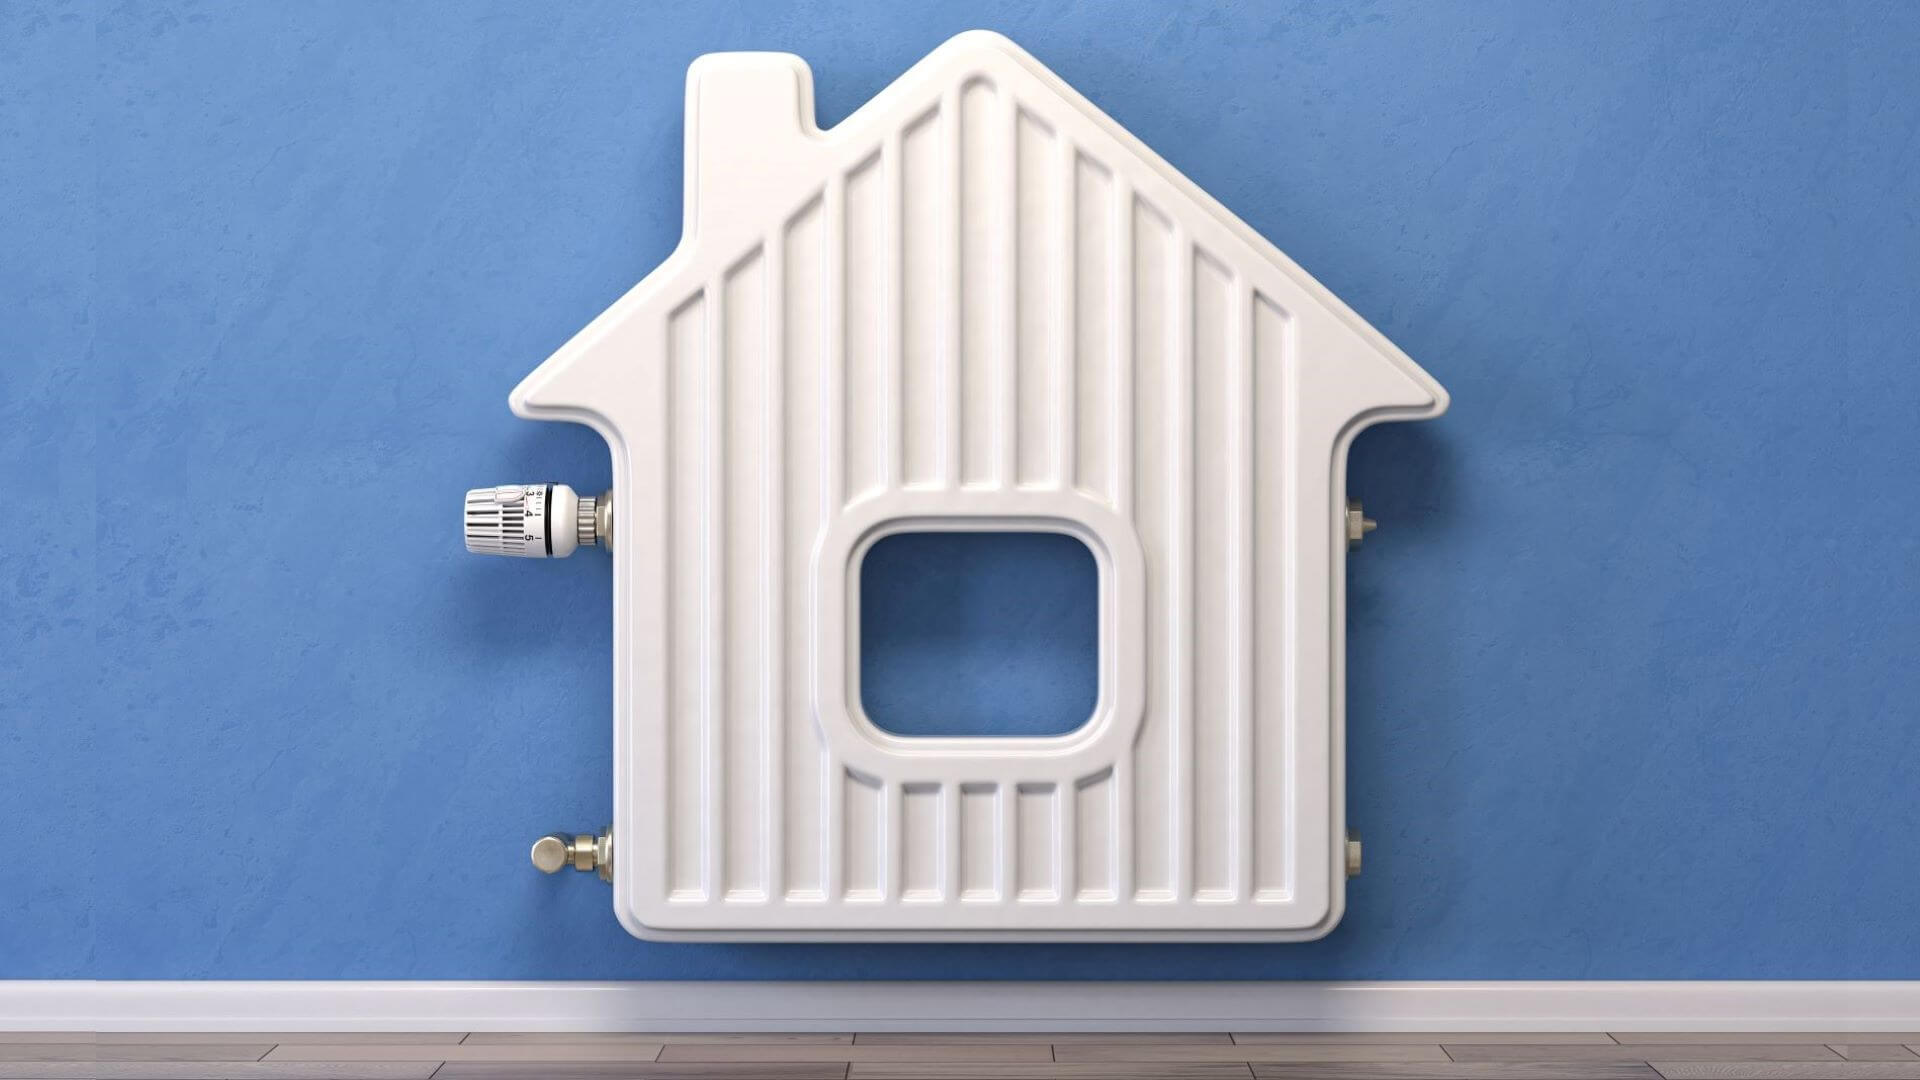 Radiator shaped as a house against blue wall